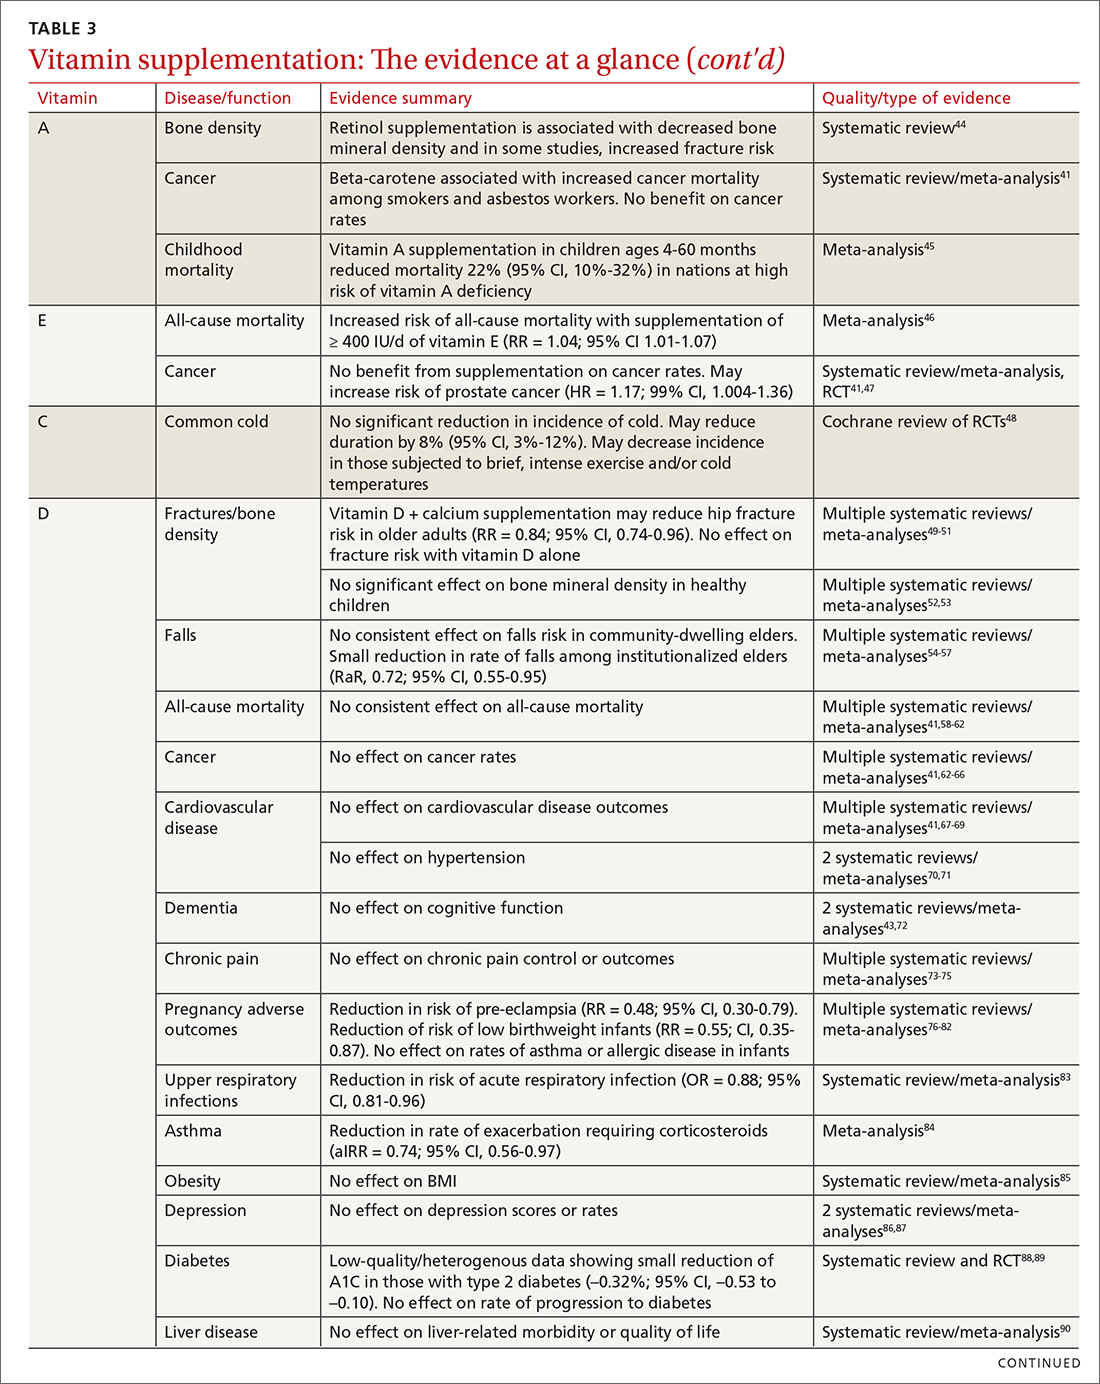 Vitamin supplementation: The evidence at a glance